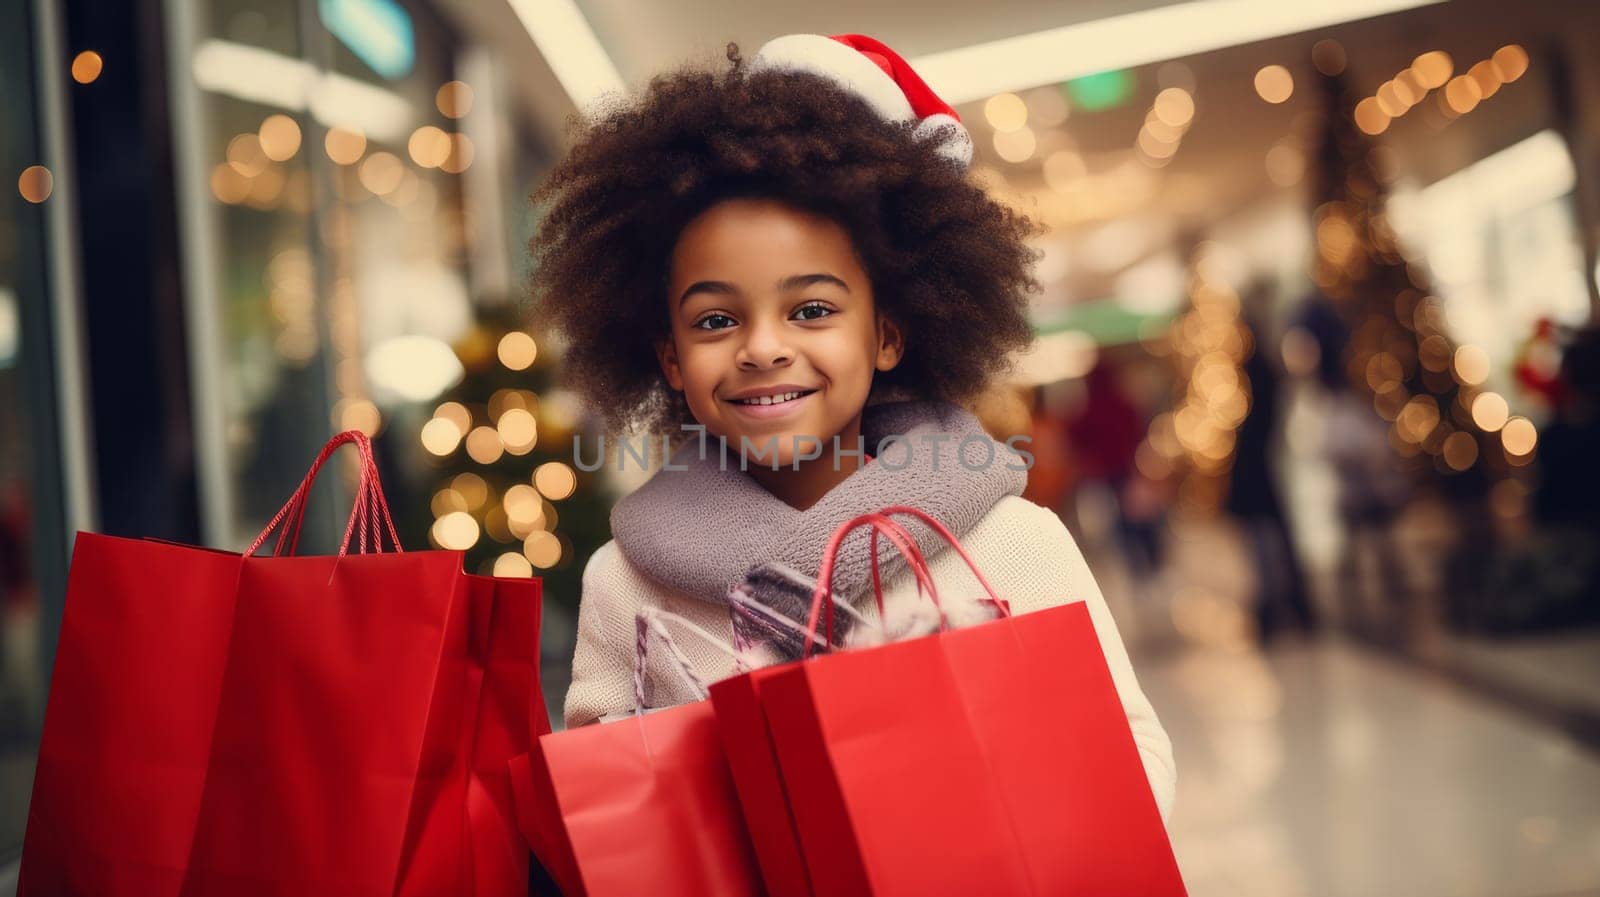 Smiling African American child with Christmas gifts in shopping bags at the mall. Christmas sale concept.